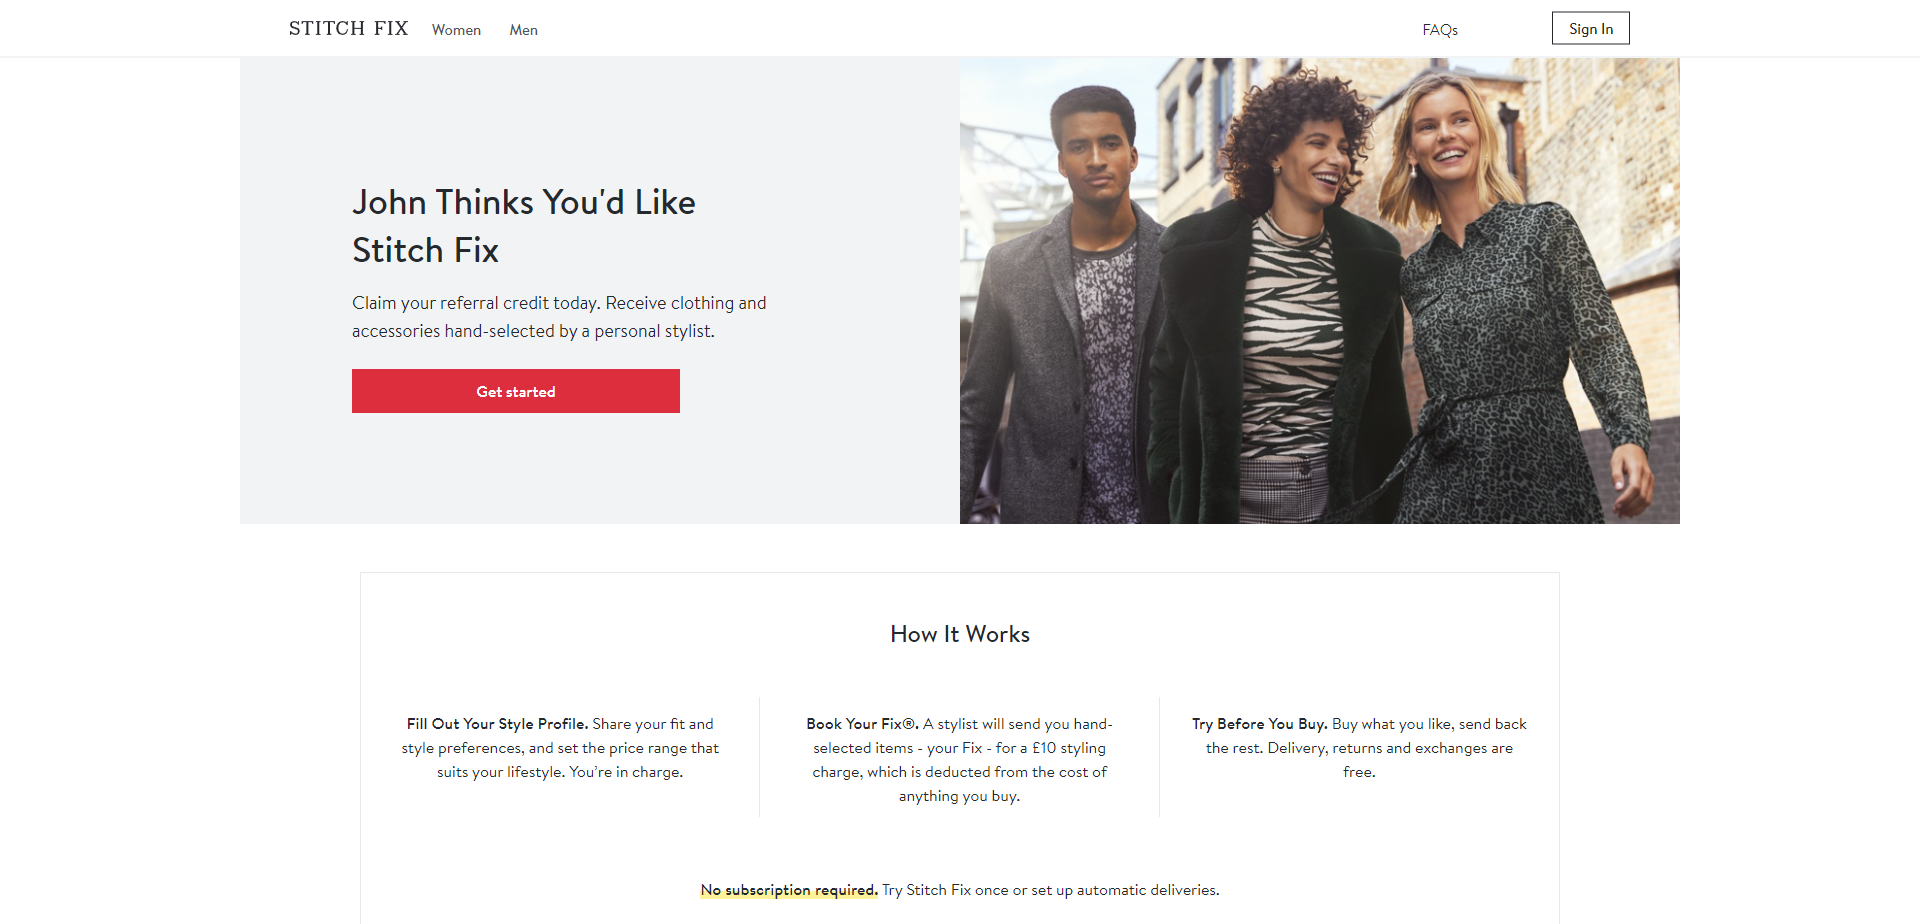 Referral Landing Page for Stitch Fix